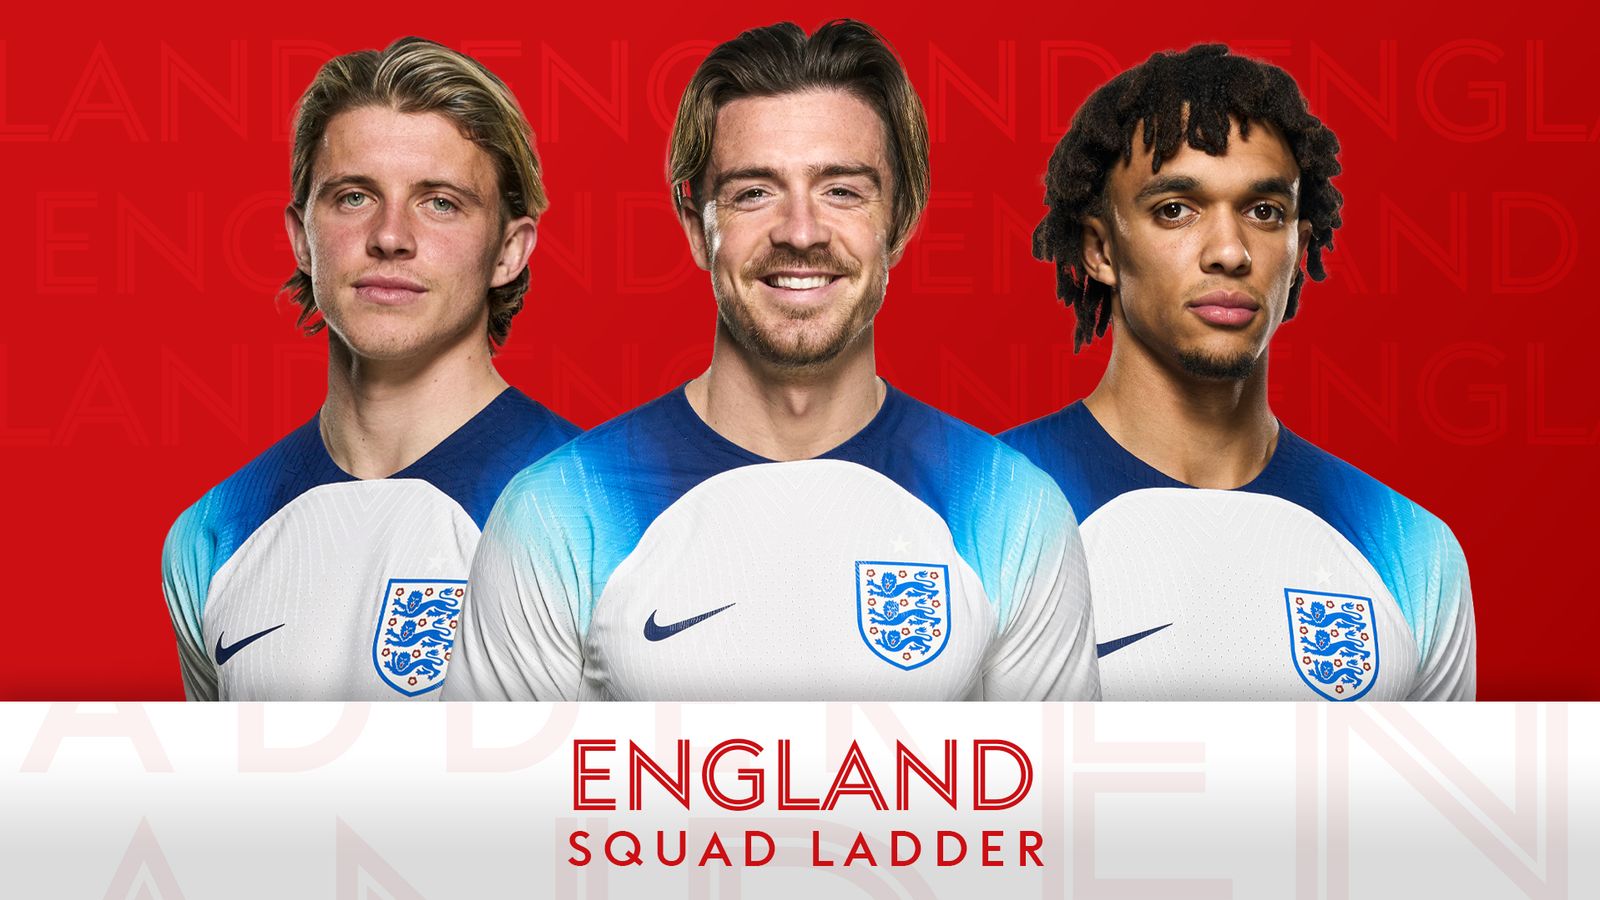 England World Cup squad ladder: Jack Grealish on the plane after Manchester derby display, Callum Wilson a new entry, Trent Alexander-Arnold still sliding